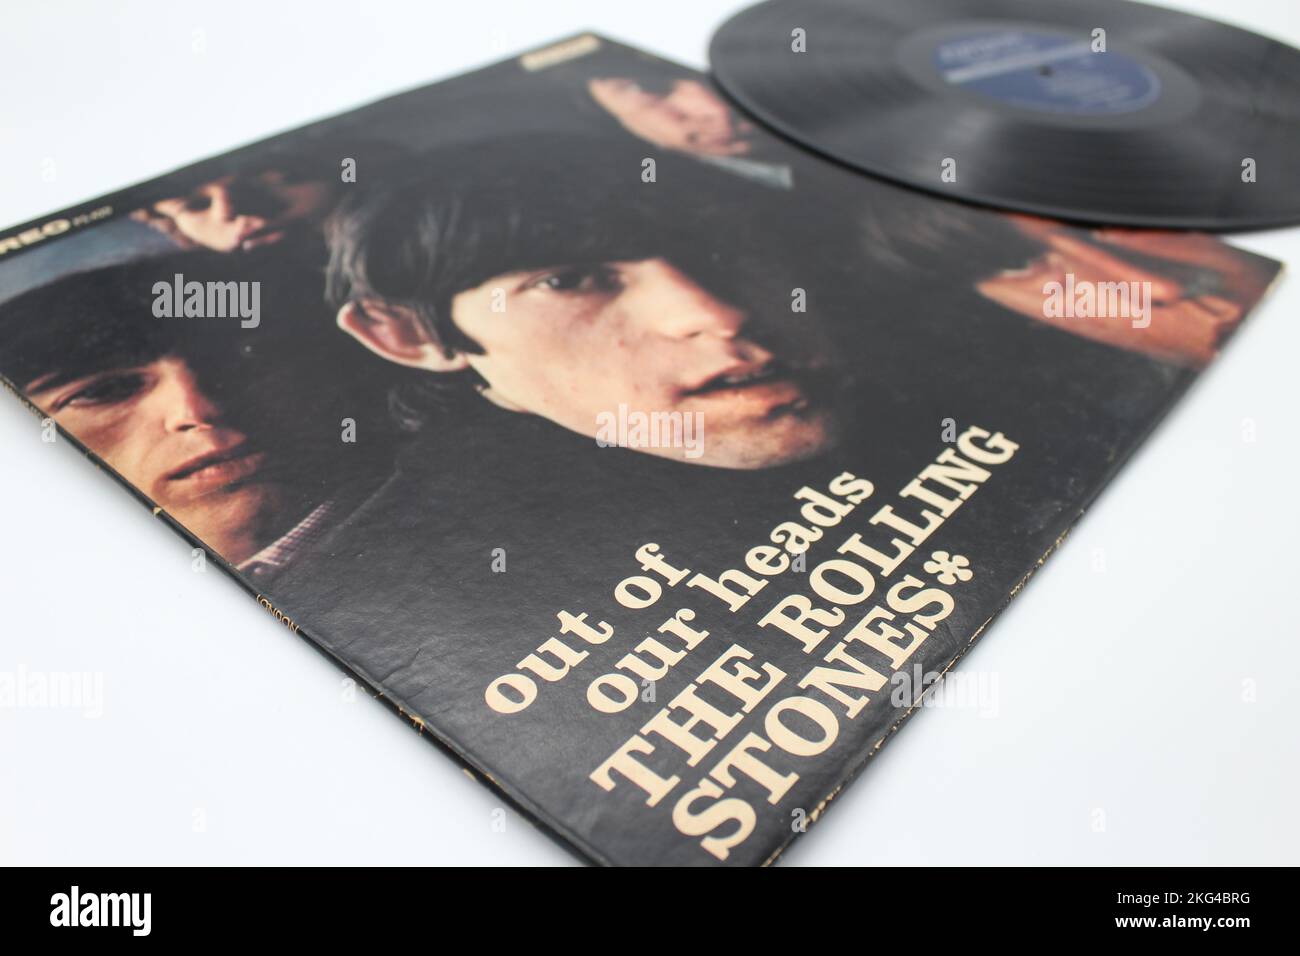 Rock and blues band, The Rolling Stones music album on vinyl record LP disc. Titled: Out of Our Heads album cover Stock Photo